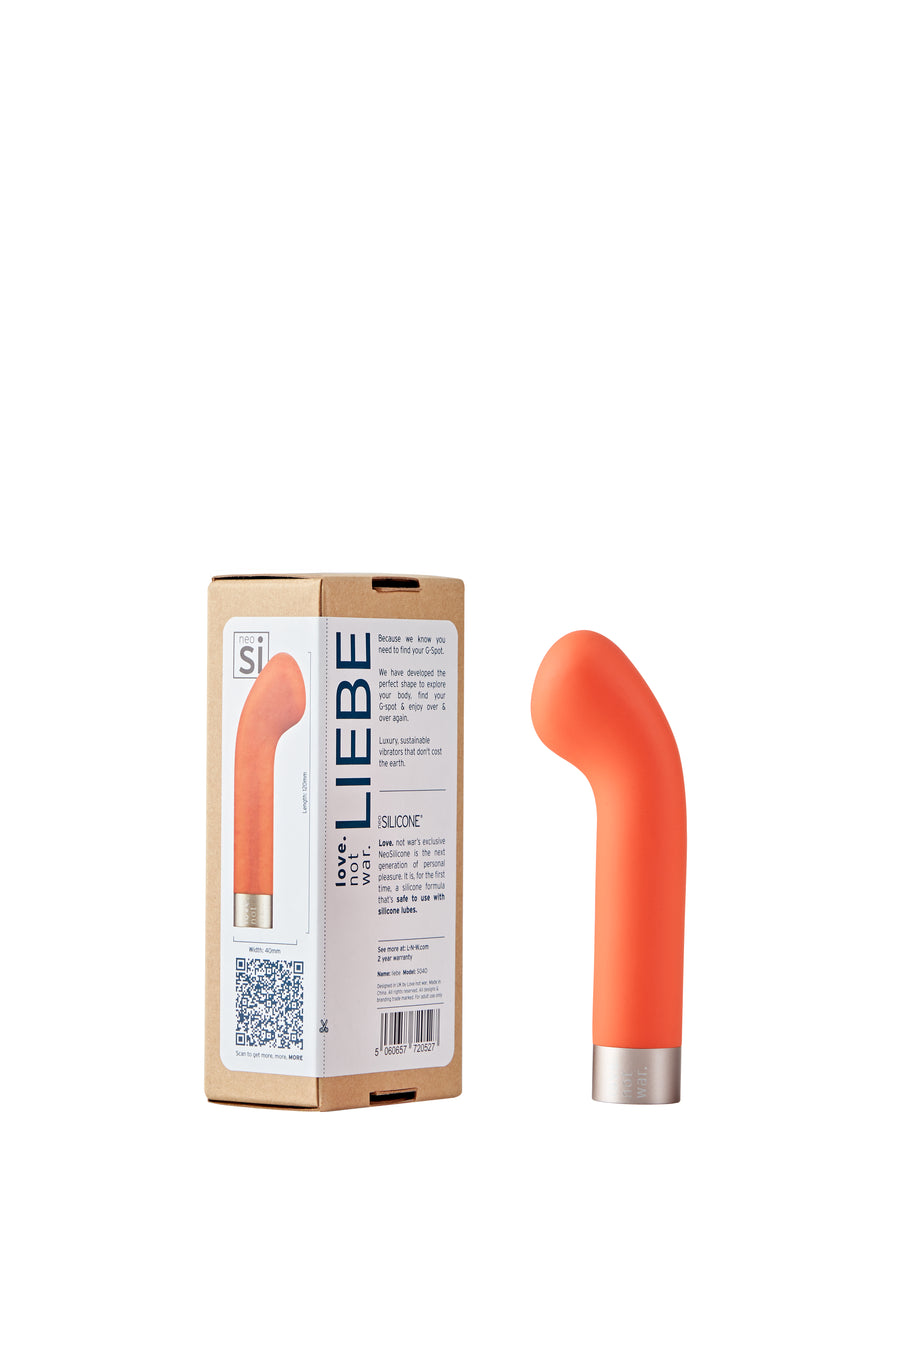 Classic Bundle - Amore Bullet and Liebe G-Spot Vibrators for Quiet Award-Winning Couples Play